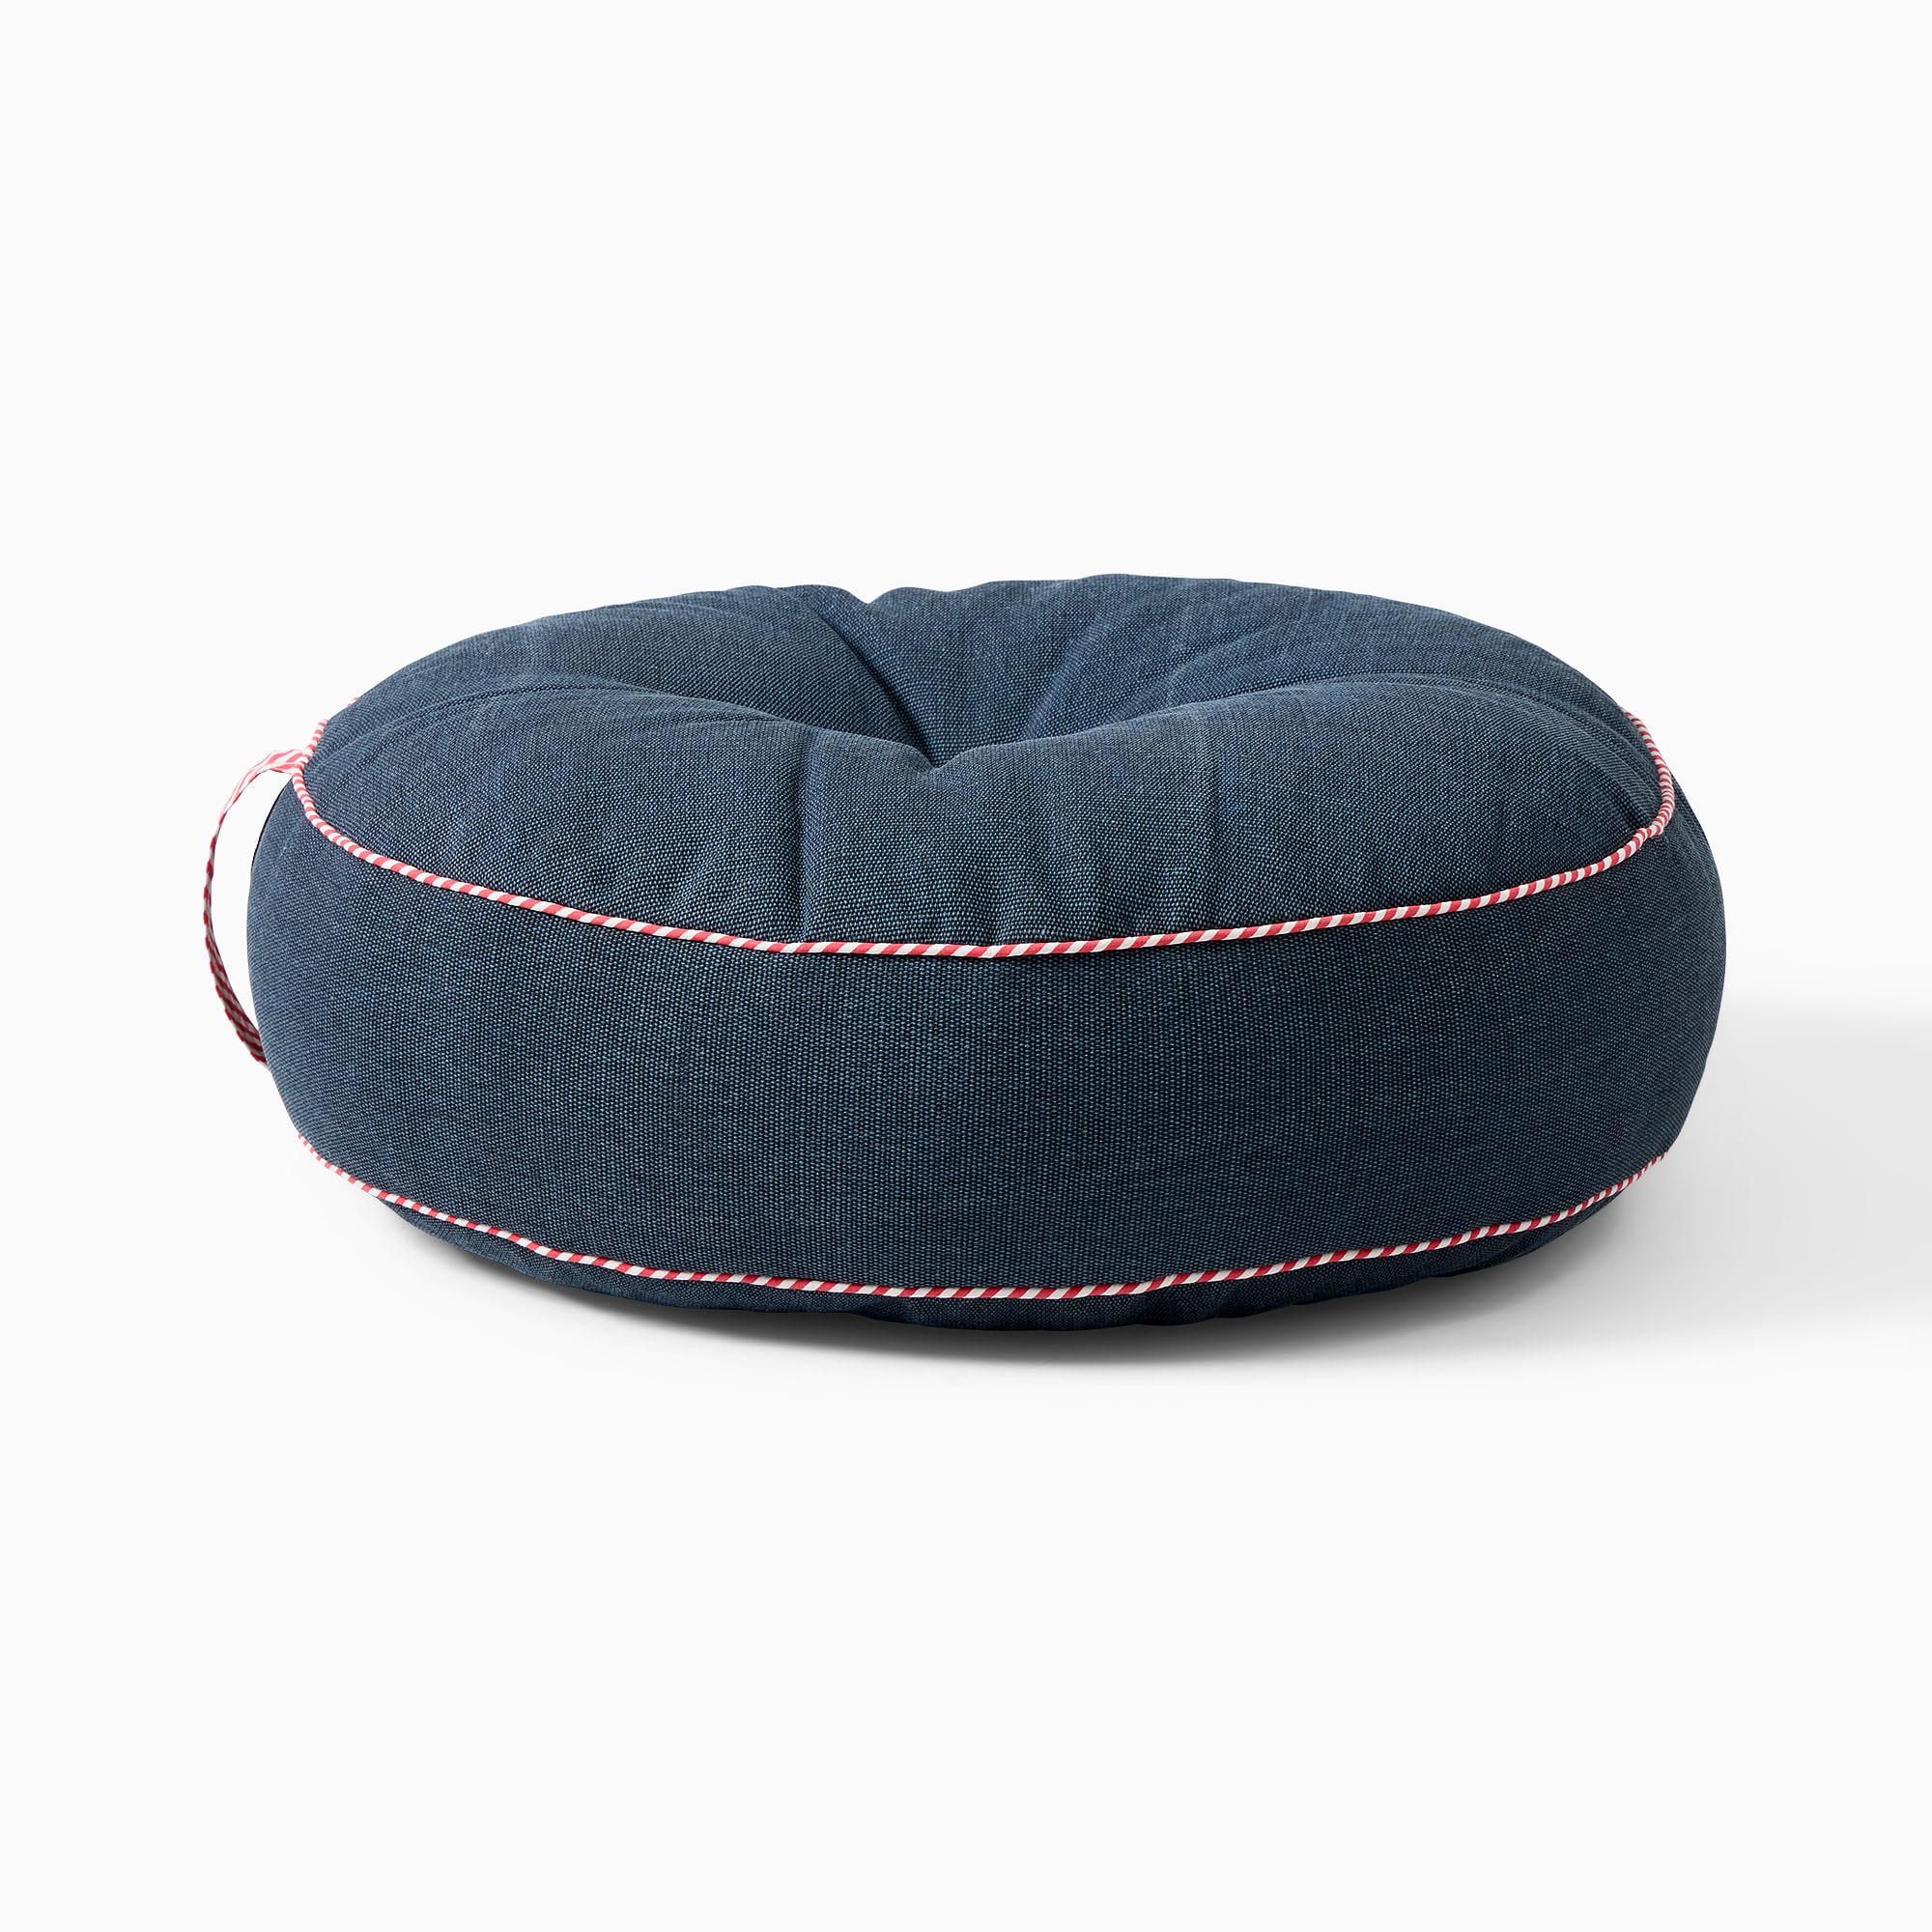 Navy round floor pillow with red and white striped borders.